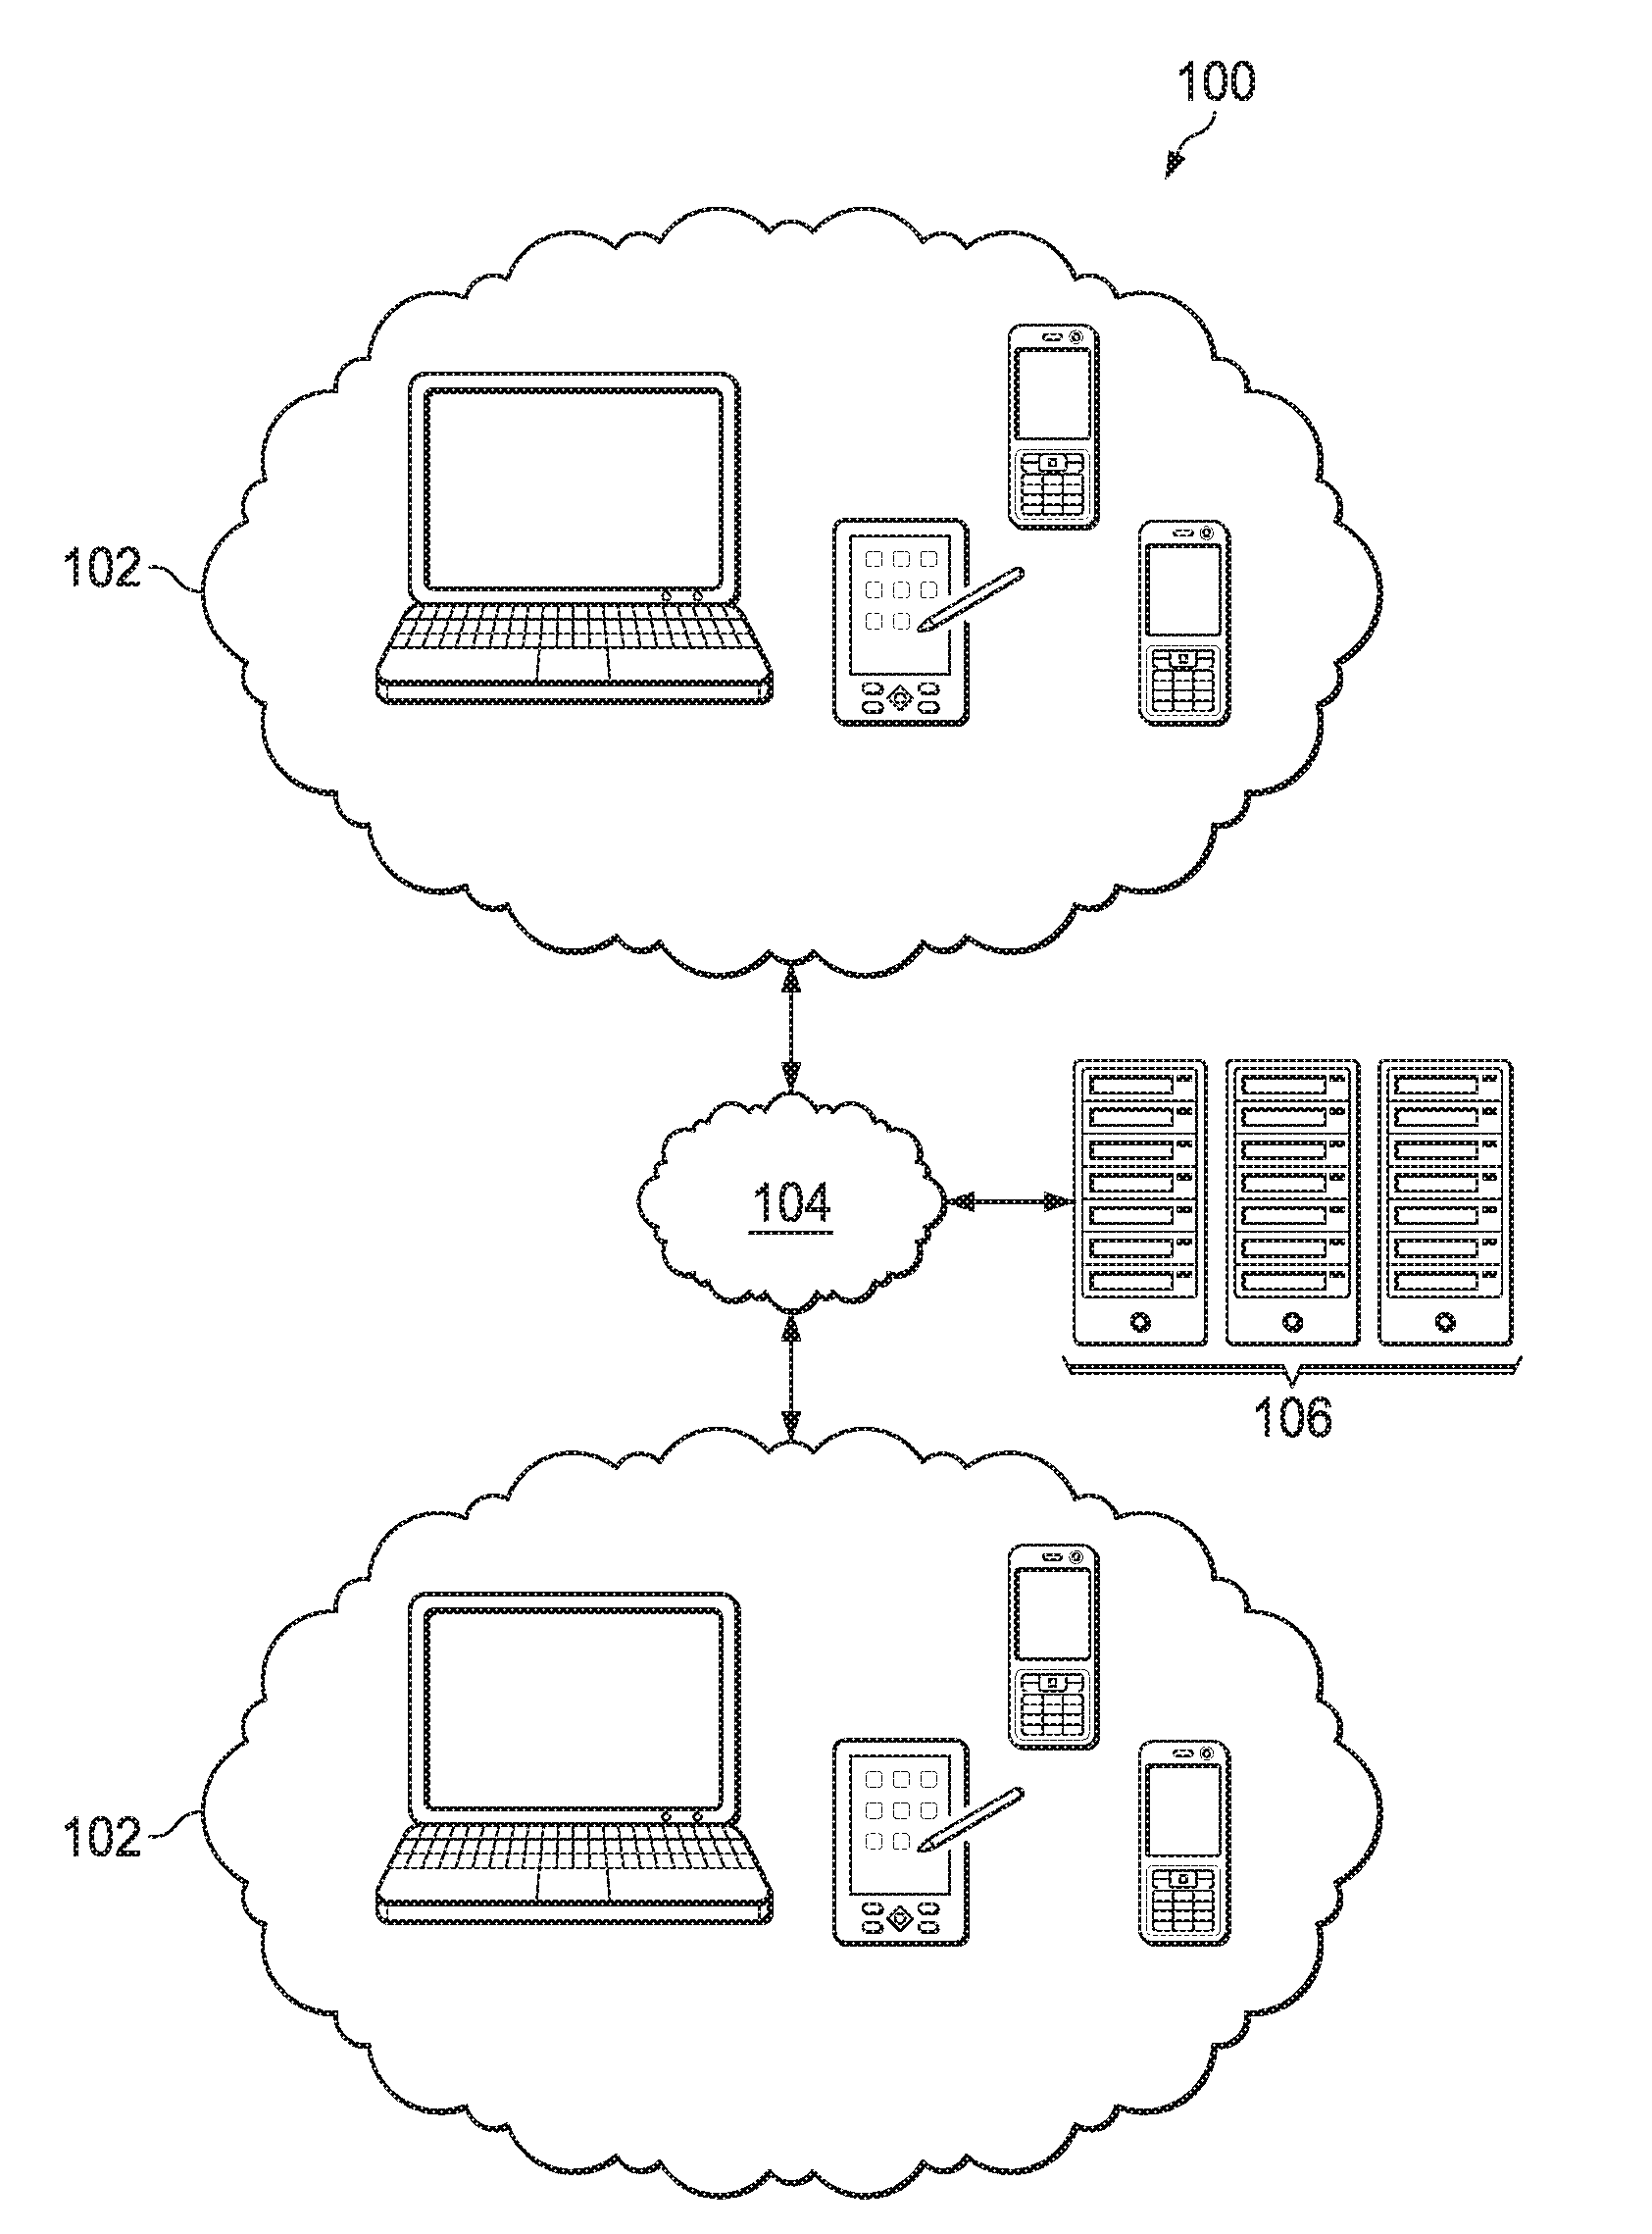 System and Method for Elastic Scaling using a Container-Based Platform